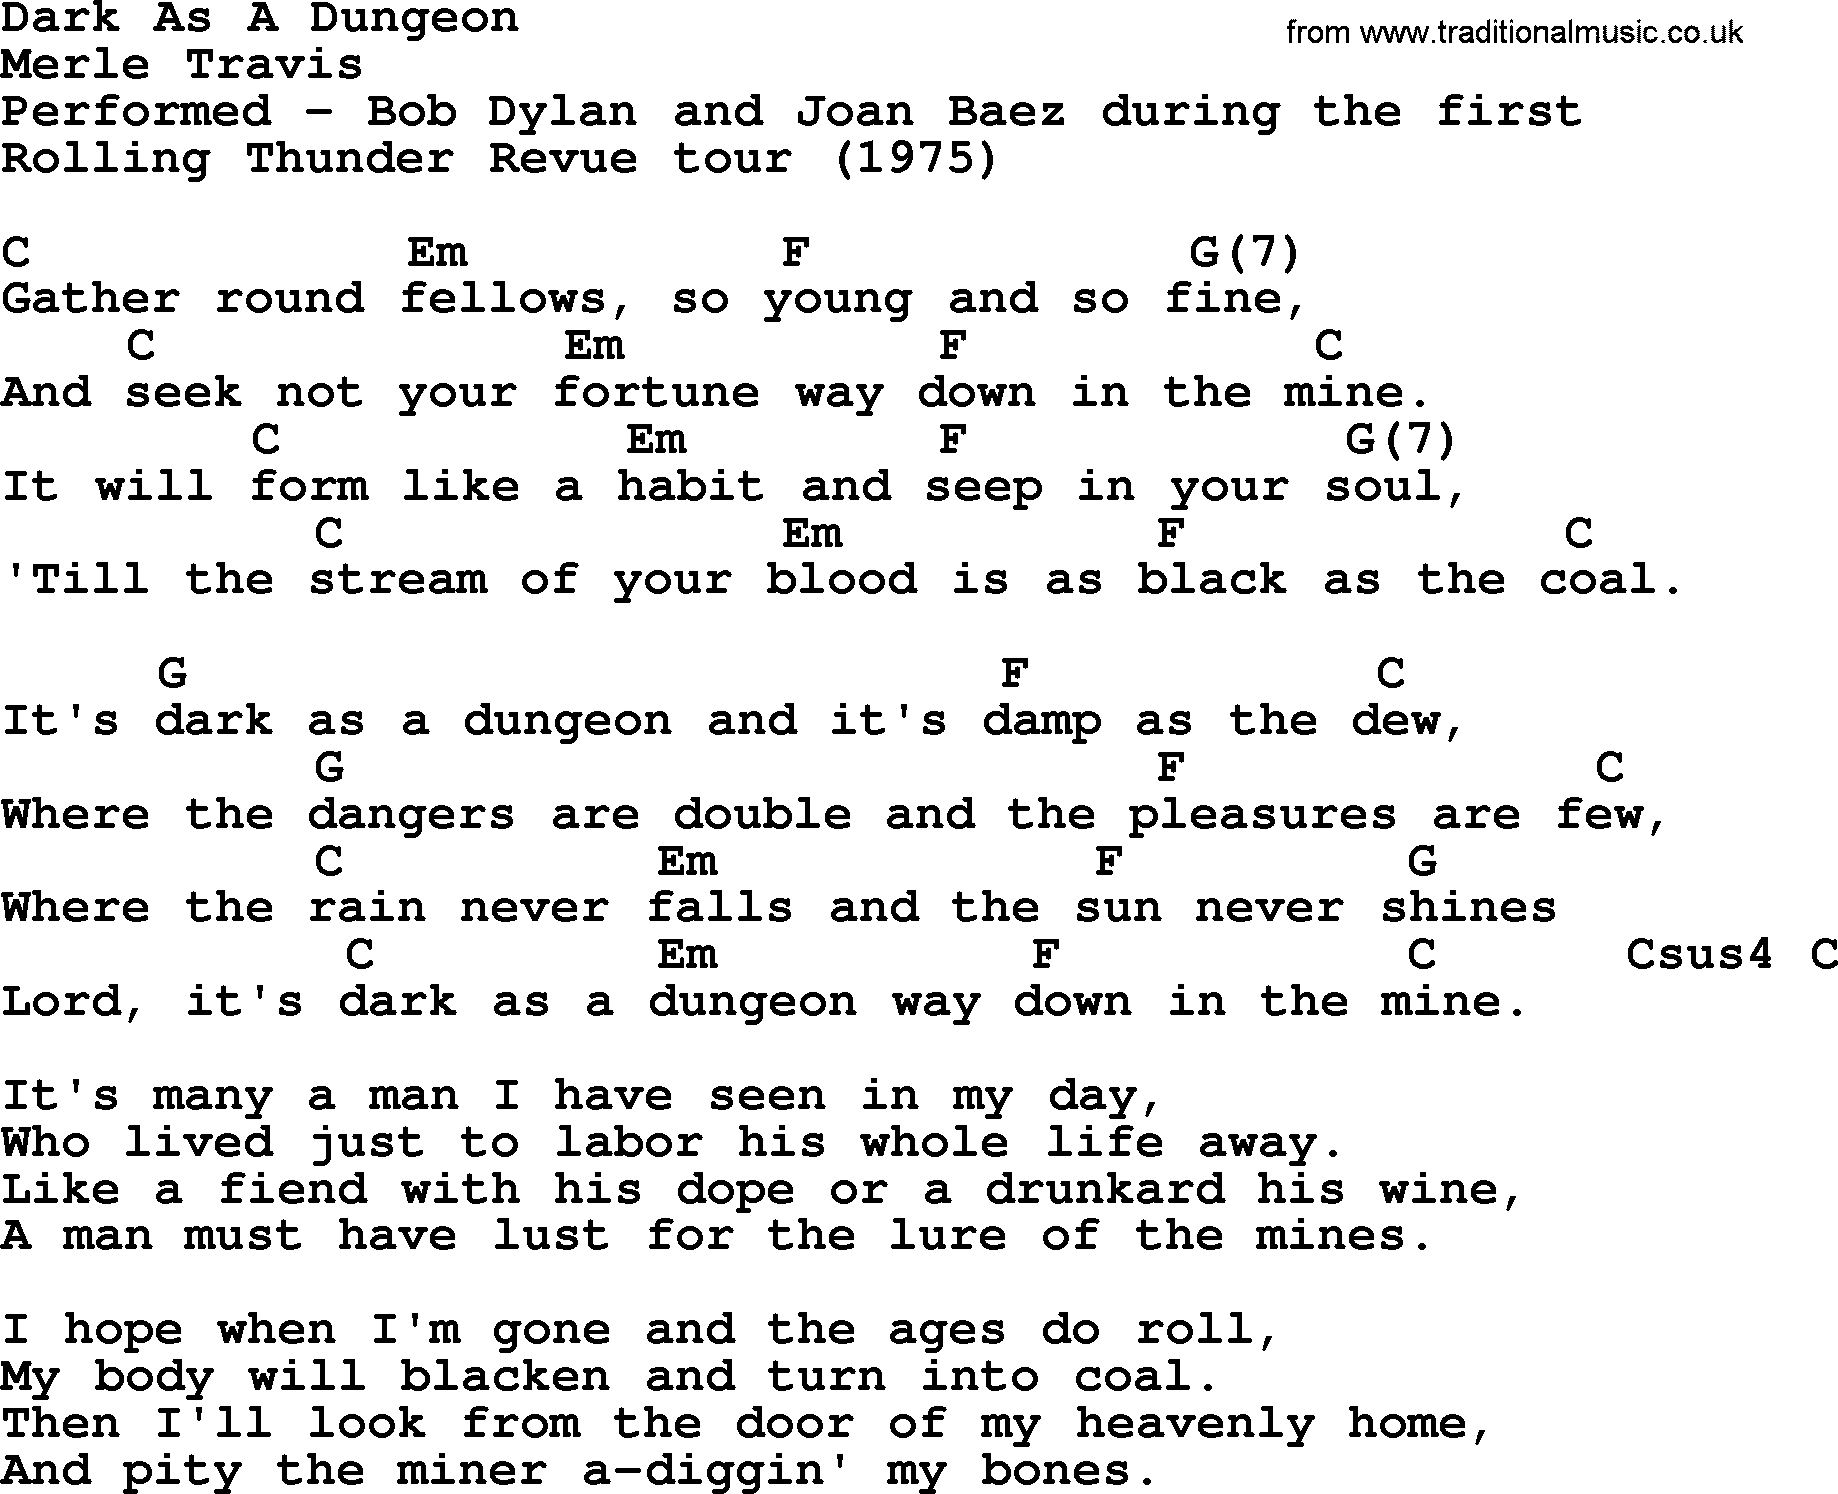 Bob Dylan song, lyrics with chords - Dark As A Dungeon